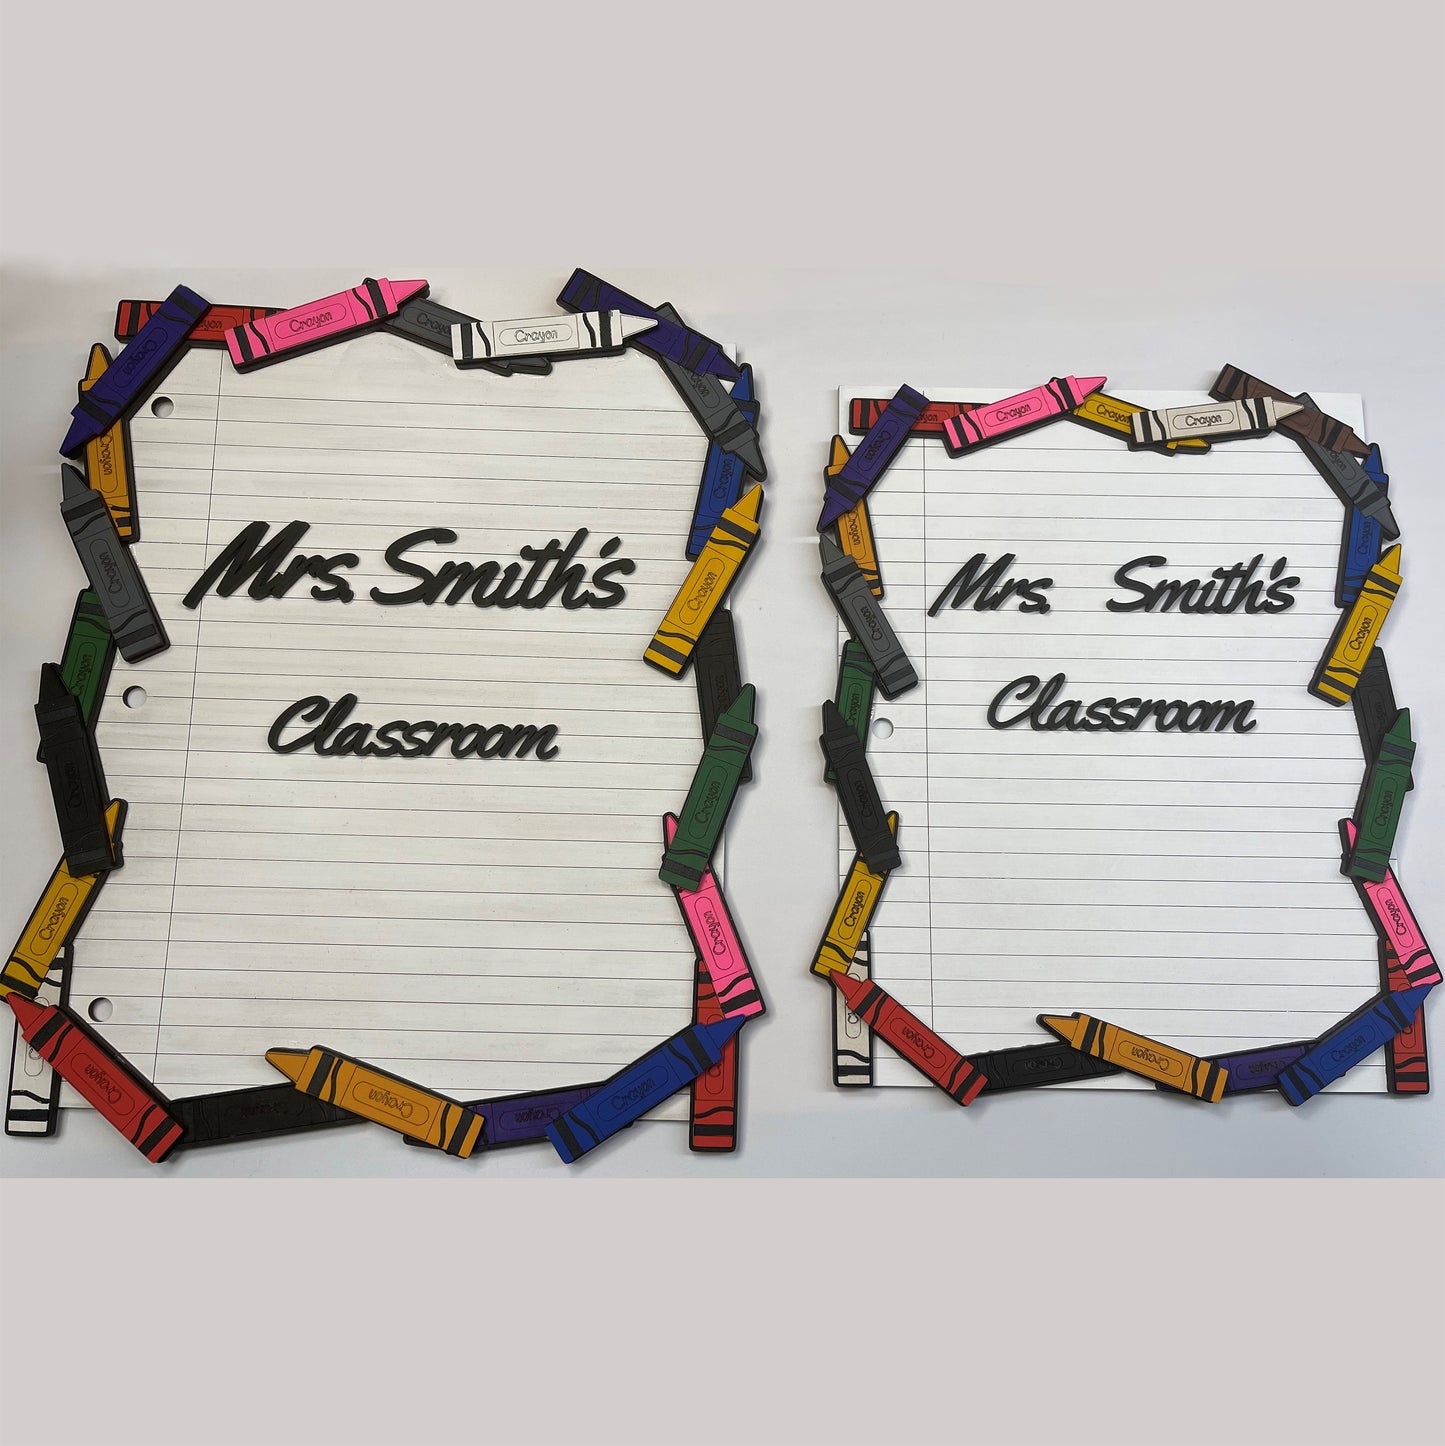 Personalized Crayon and Paper Frame